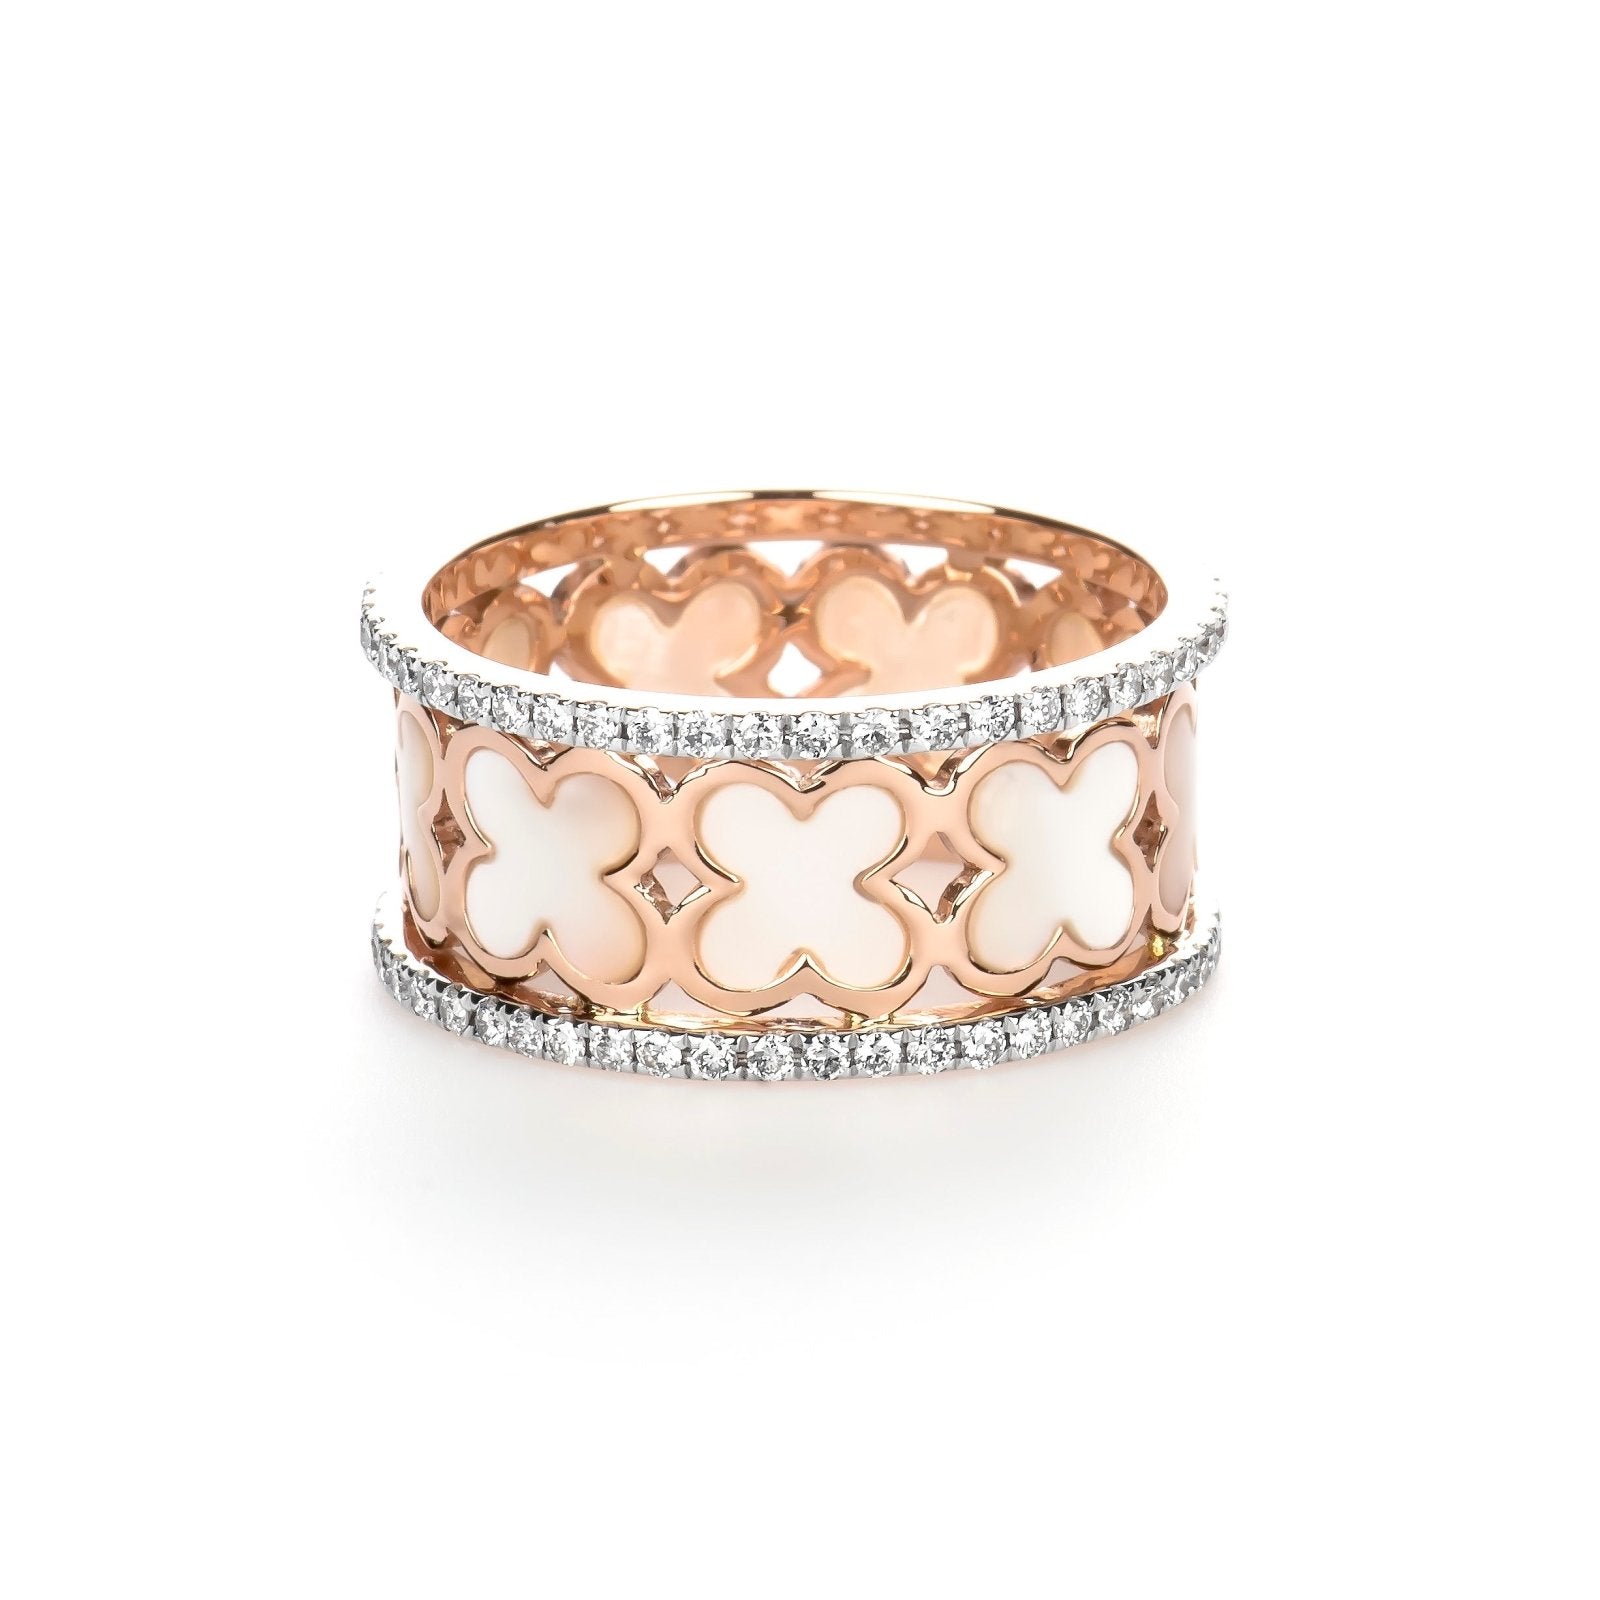 Mother of Pearl Clover Diamond Banded Eternity Ring Rings Estella Collection #product_description# 17209 14k Birthstone Diamond #tag4# #tag5# #tag6# #tag7# #tag8# #tag9# #tag10#